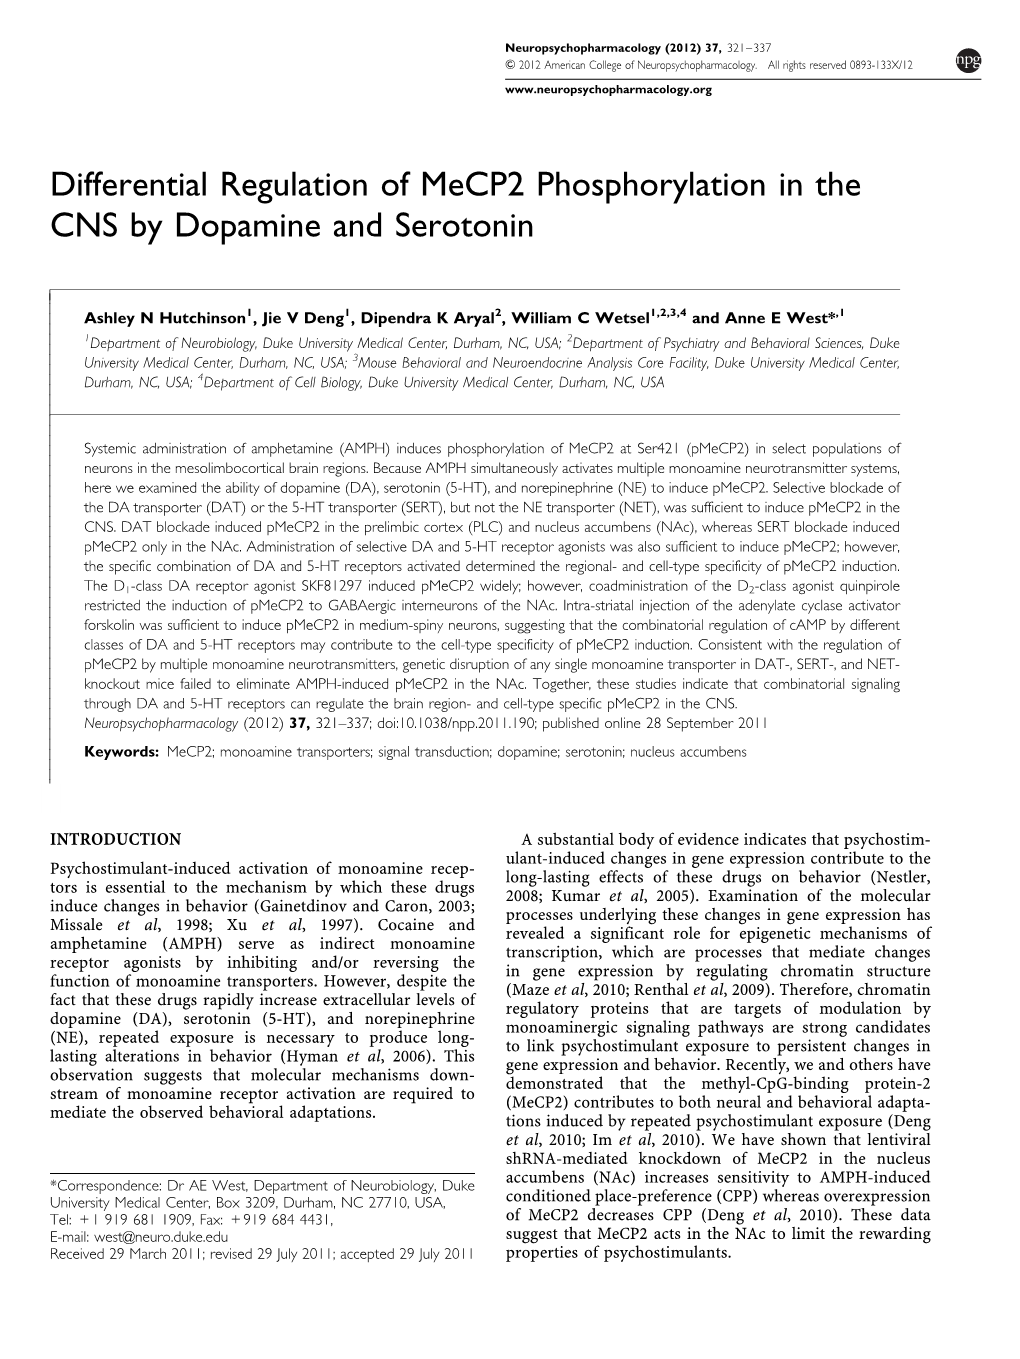 Differential Regulation of Mecp2 Phosphorylation in the CNS by Dopamine and Serotonin